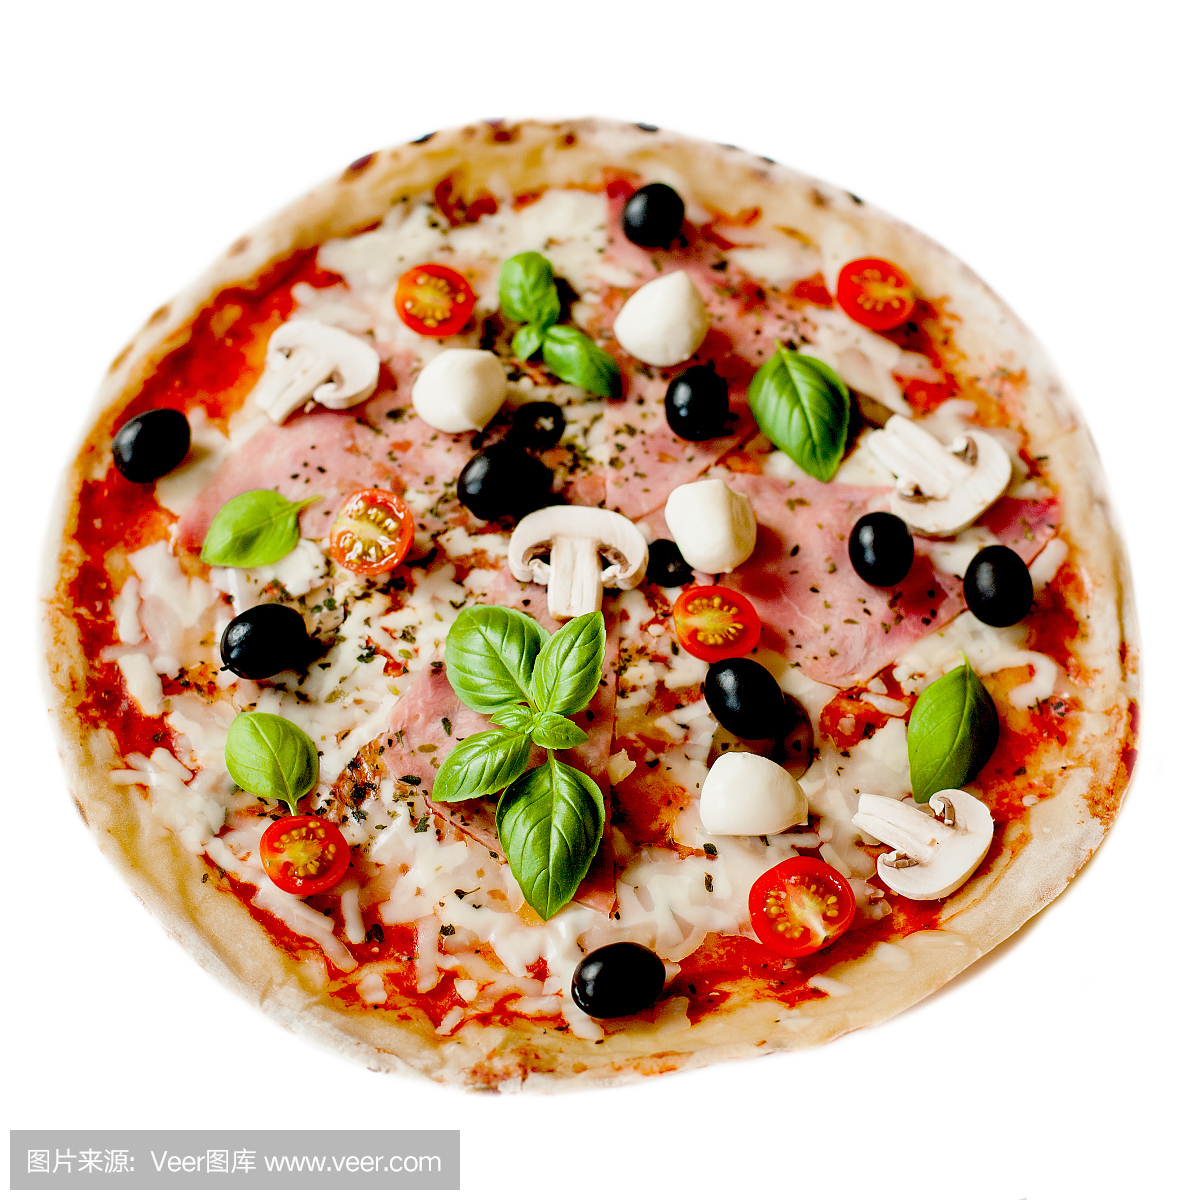 ith ham, mozzarella cheese, pepper and olives 